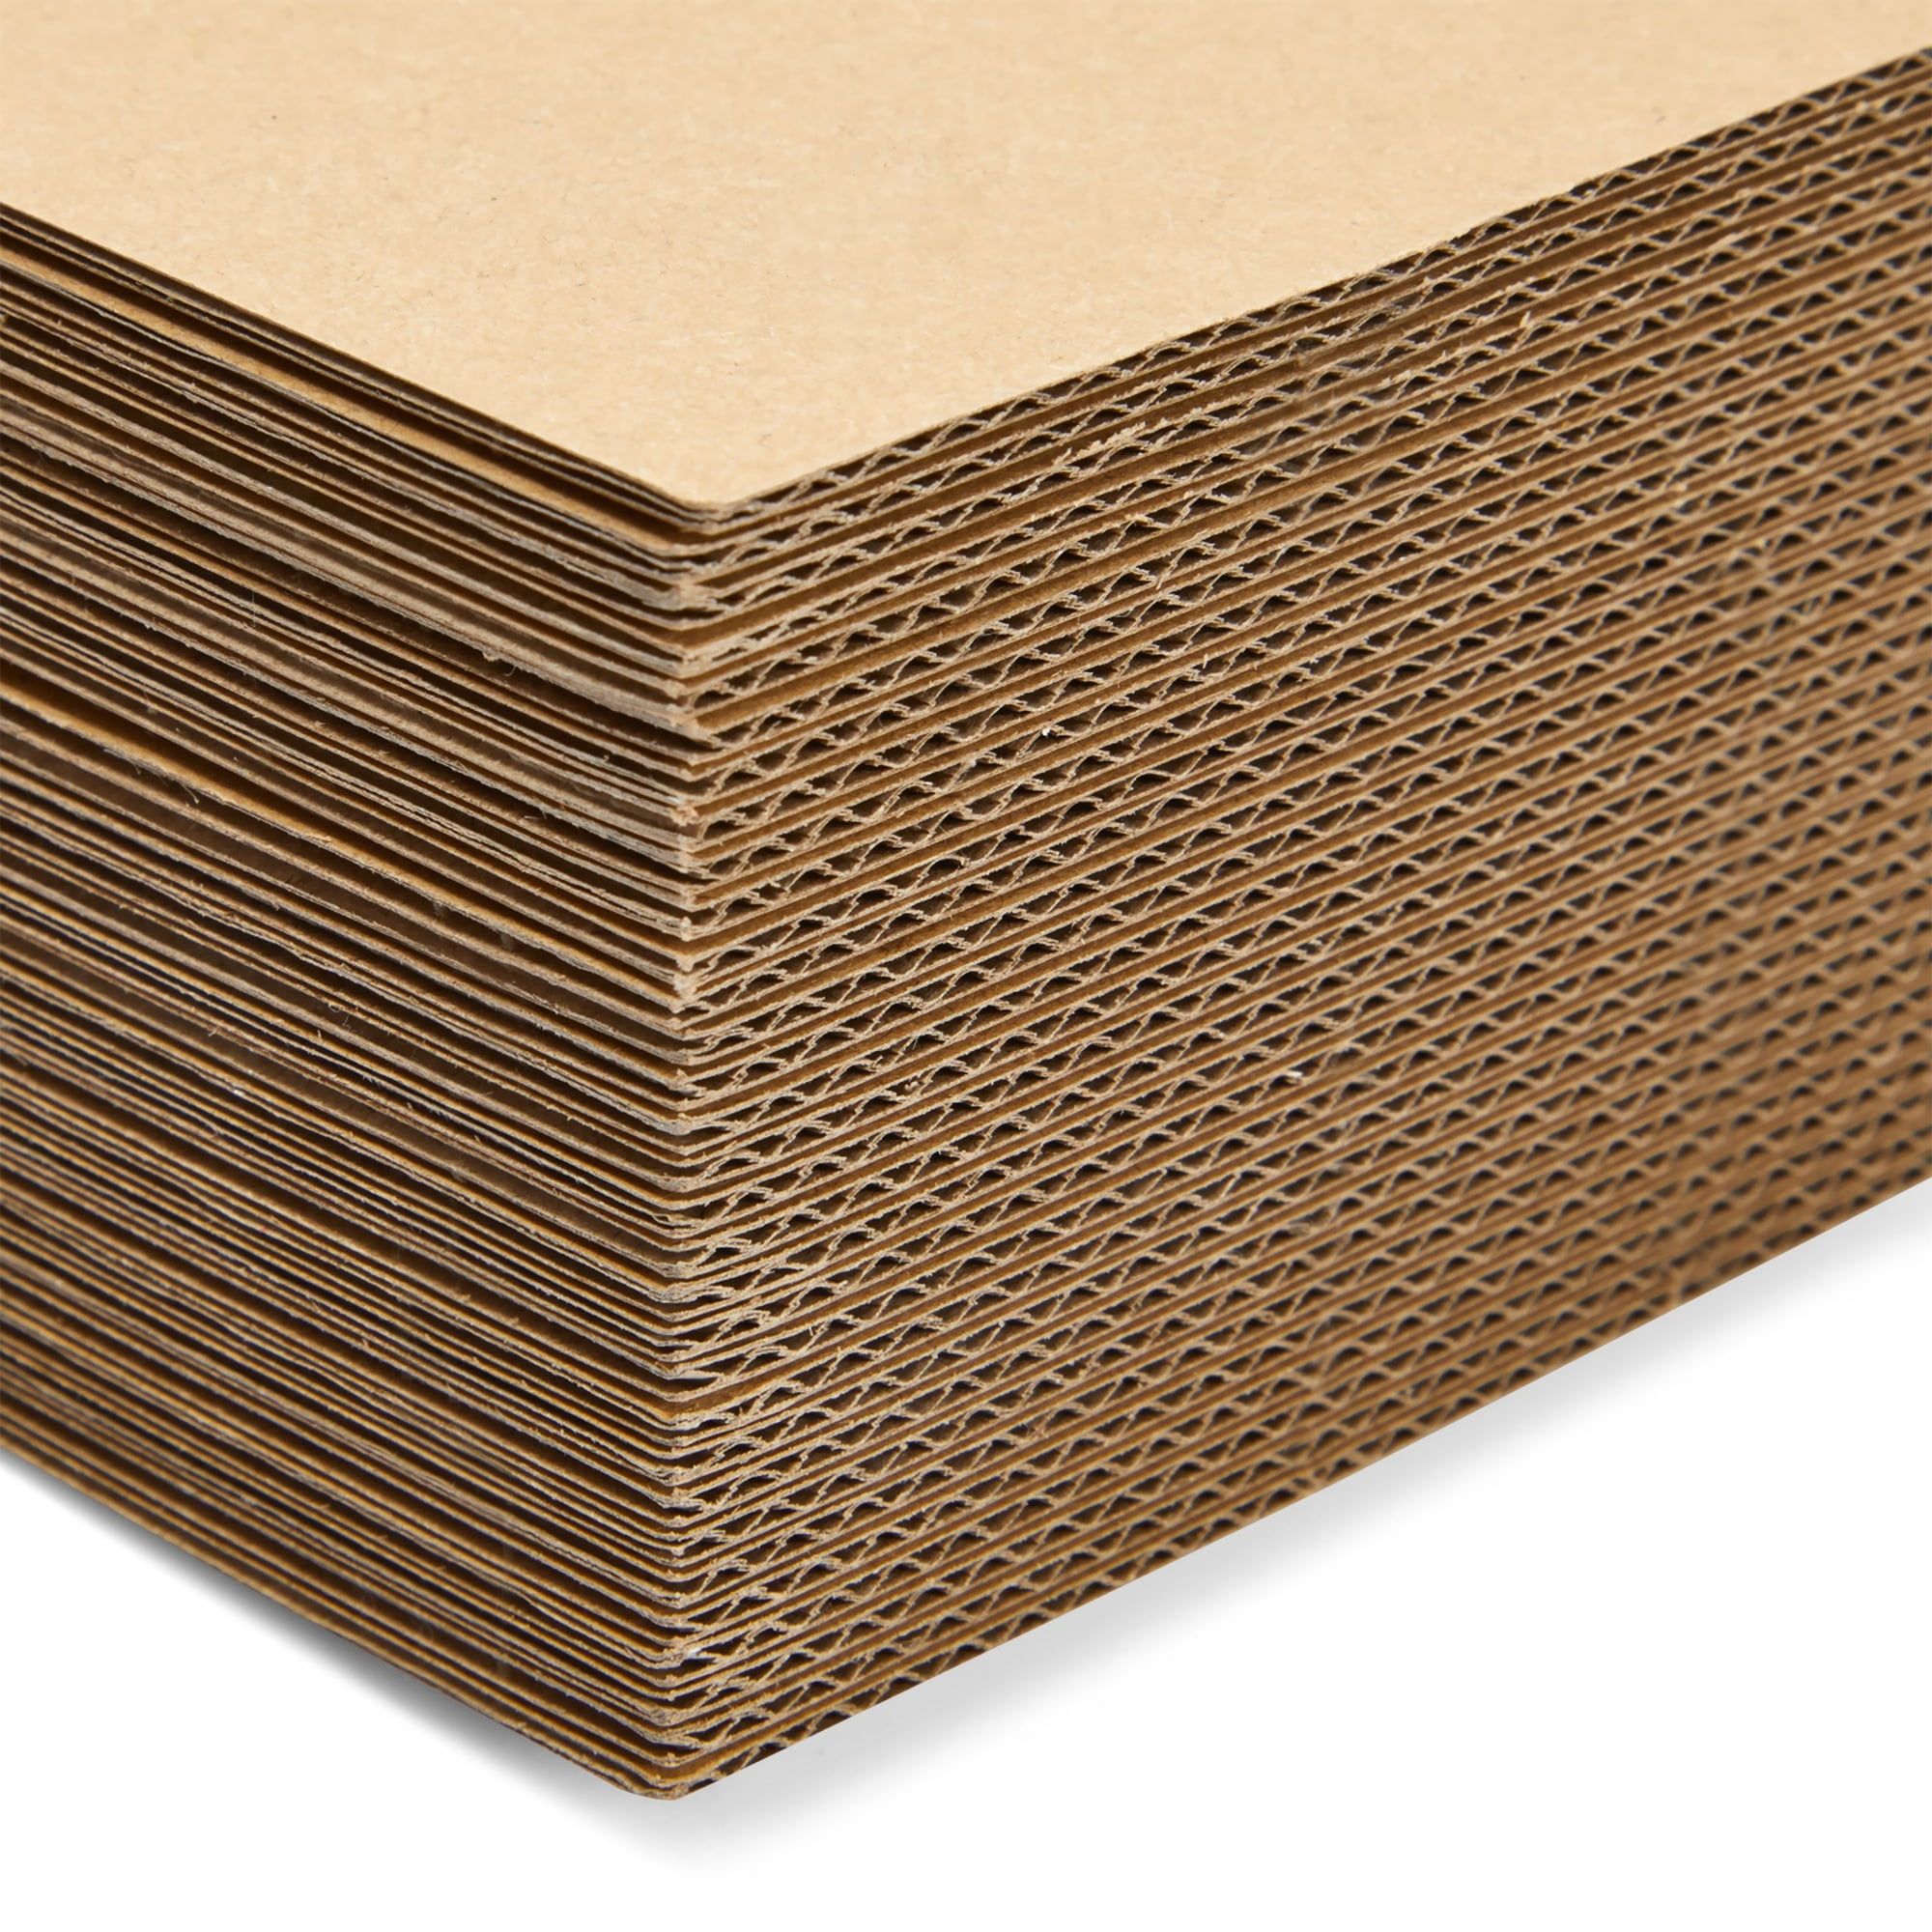 Bercoor Corrugated Cardboard Sheets, 8.5 x 11 Inch Flat Cardboard Sheets  Craft, Thick Cardboard Squares for Packing, Mailing and DIY Crafts, Pack of